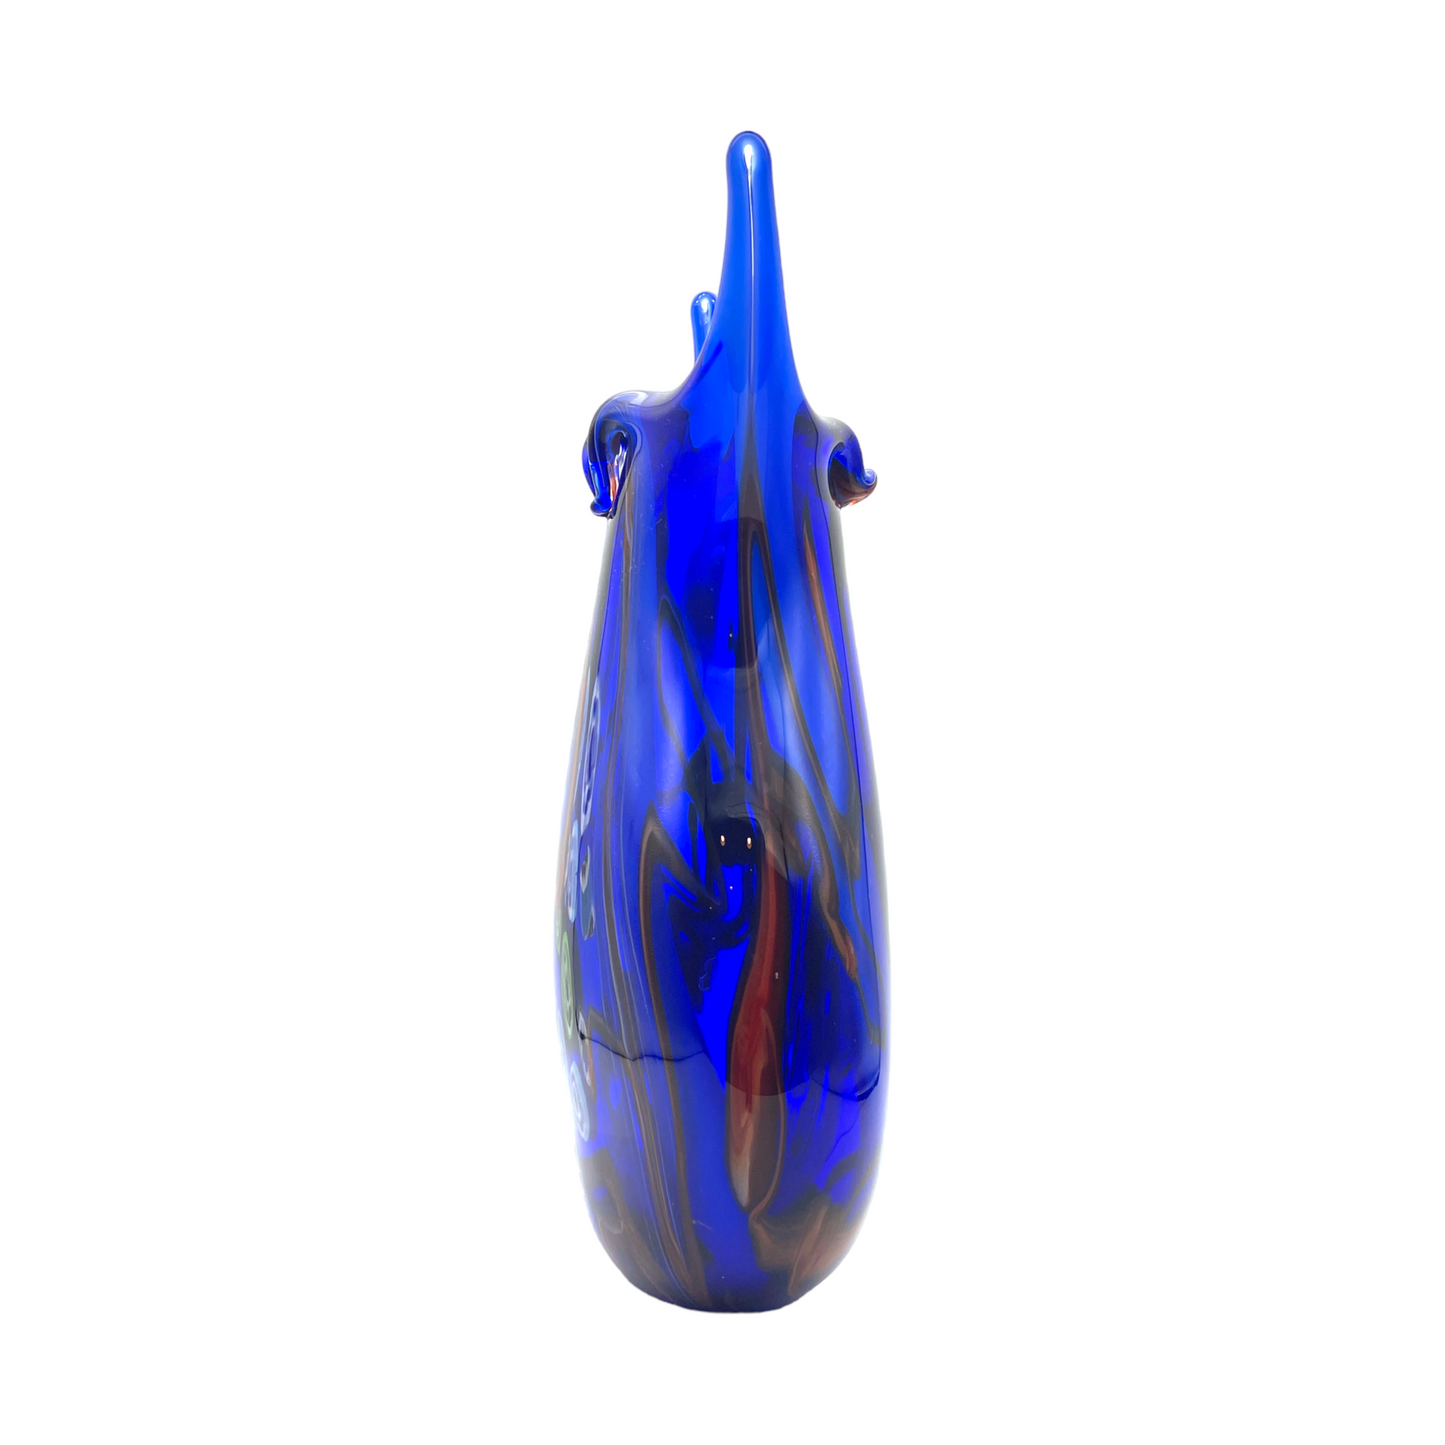 Murano Art - Enchanting Azure Dreams Glass Vase with Assorted Decorations - 12"